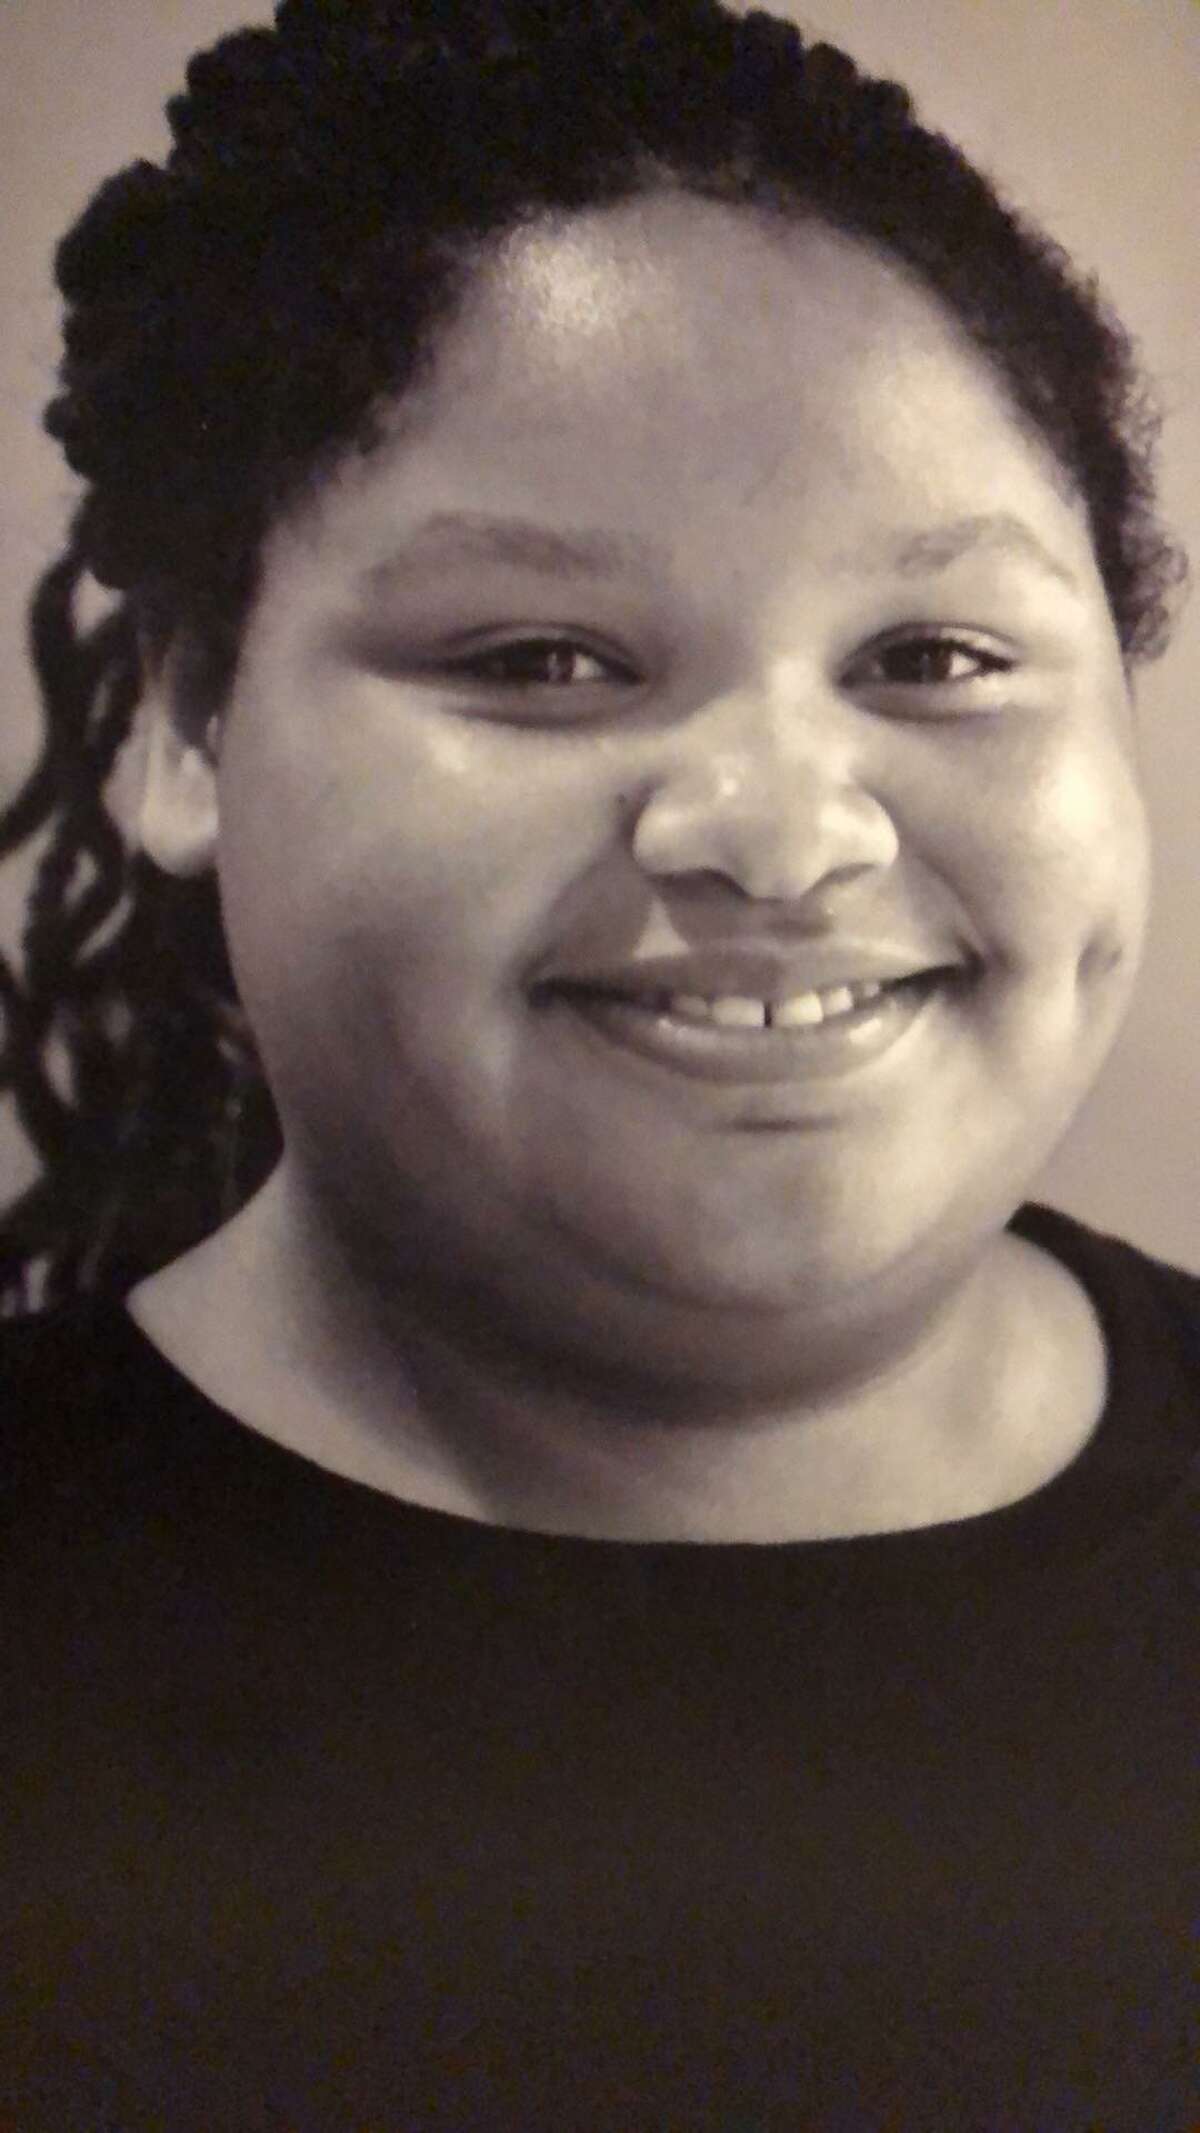 Hannah Wisdom plays a teenage Ella Fitzgerald in the world premiere of "Ella the Ungovernable" at the Valatie Community Theatre on Feb. 14 and 15. (Provided photo.)